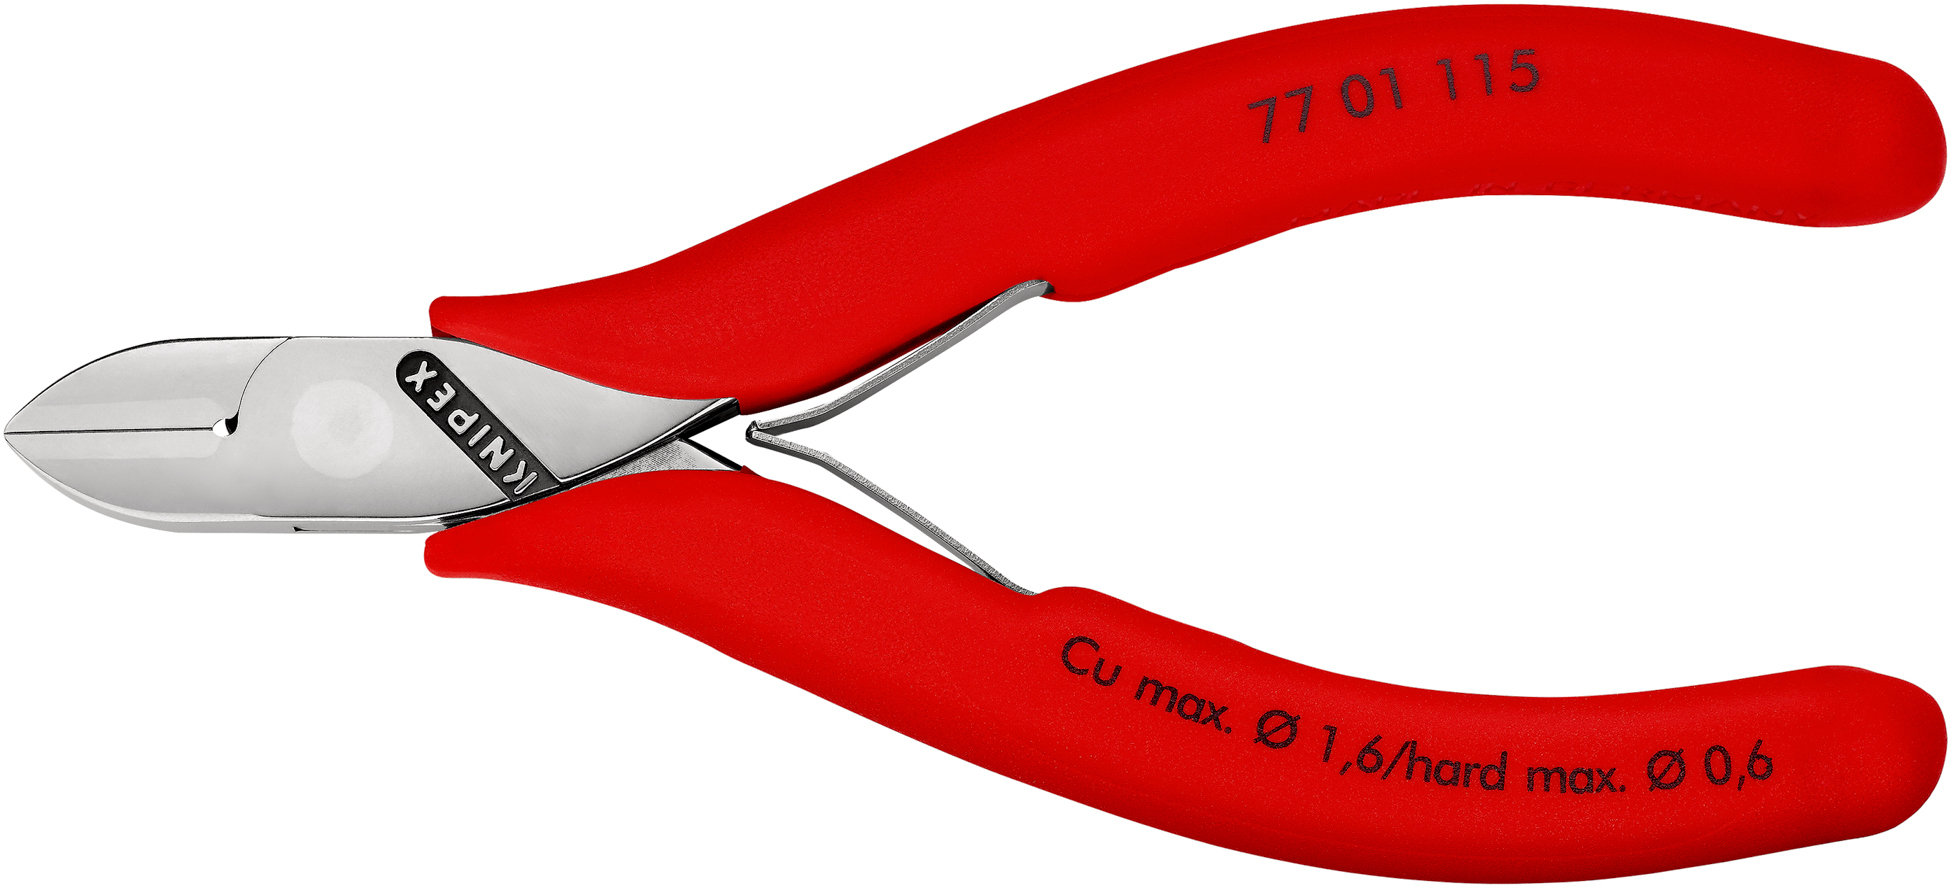 Pince coupante cote electro 115mm KNIPEX - 77 01 115